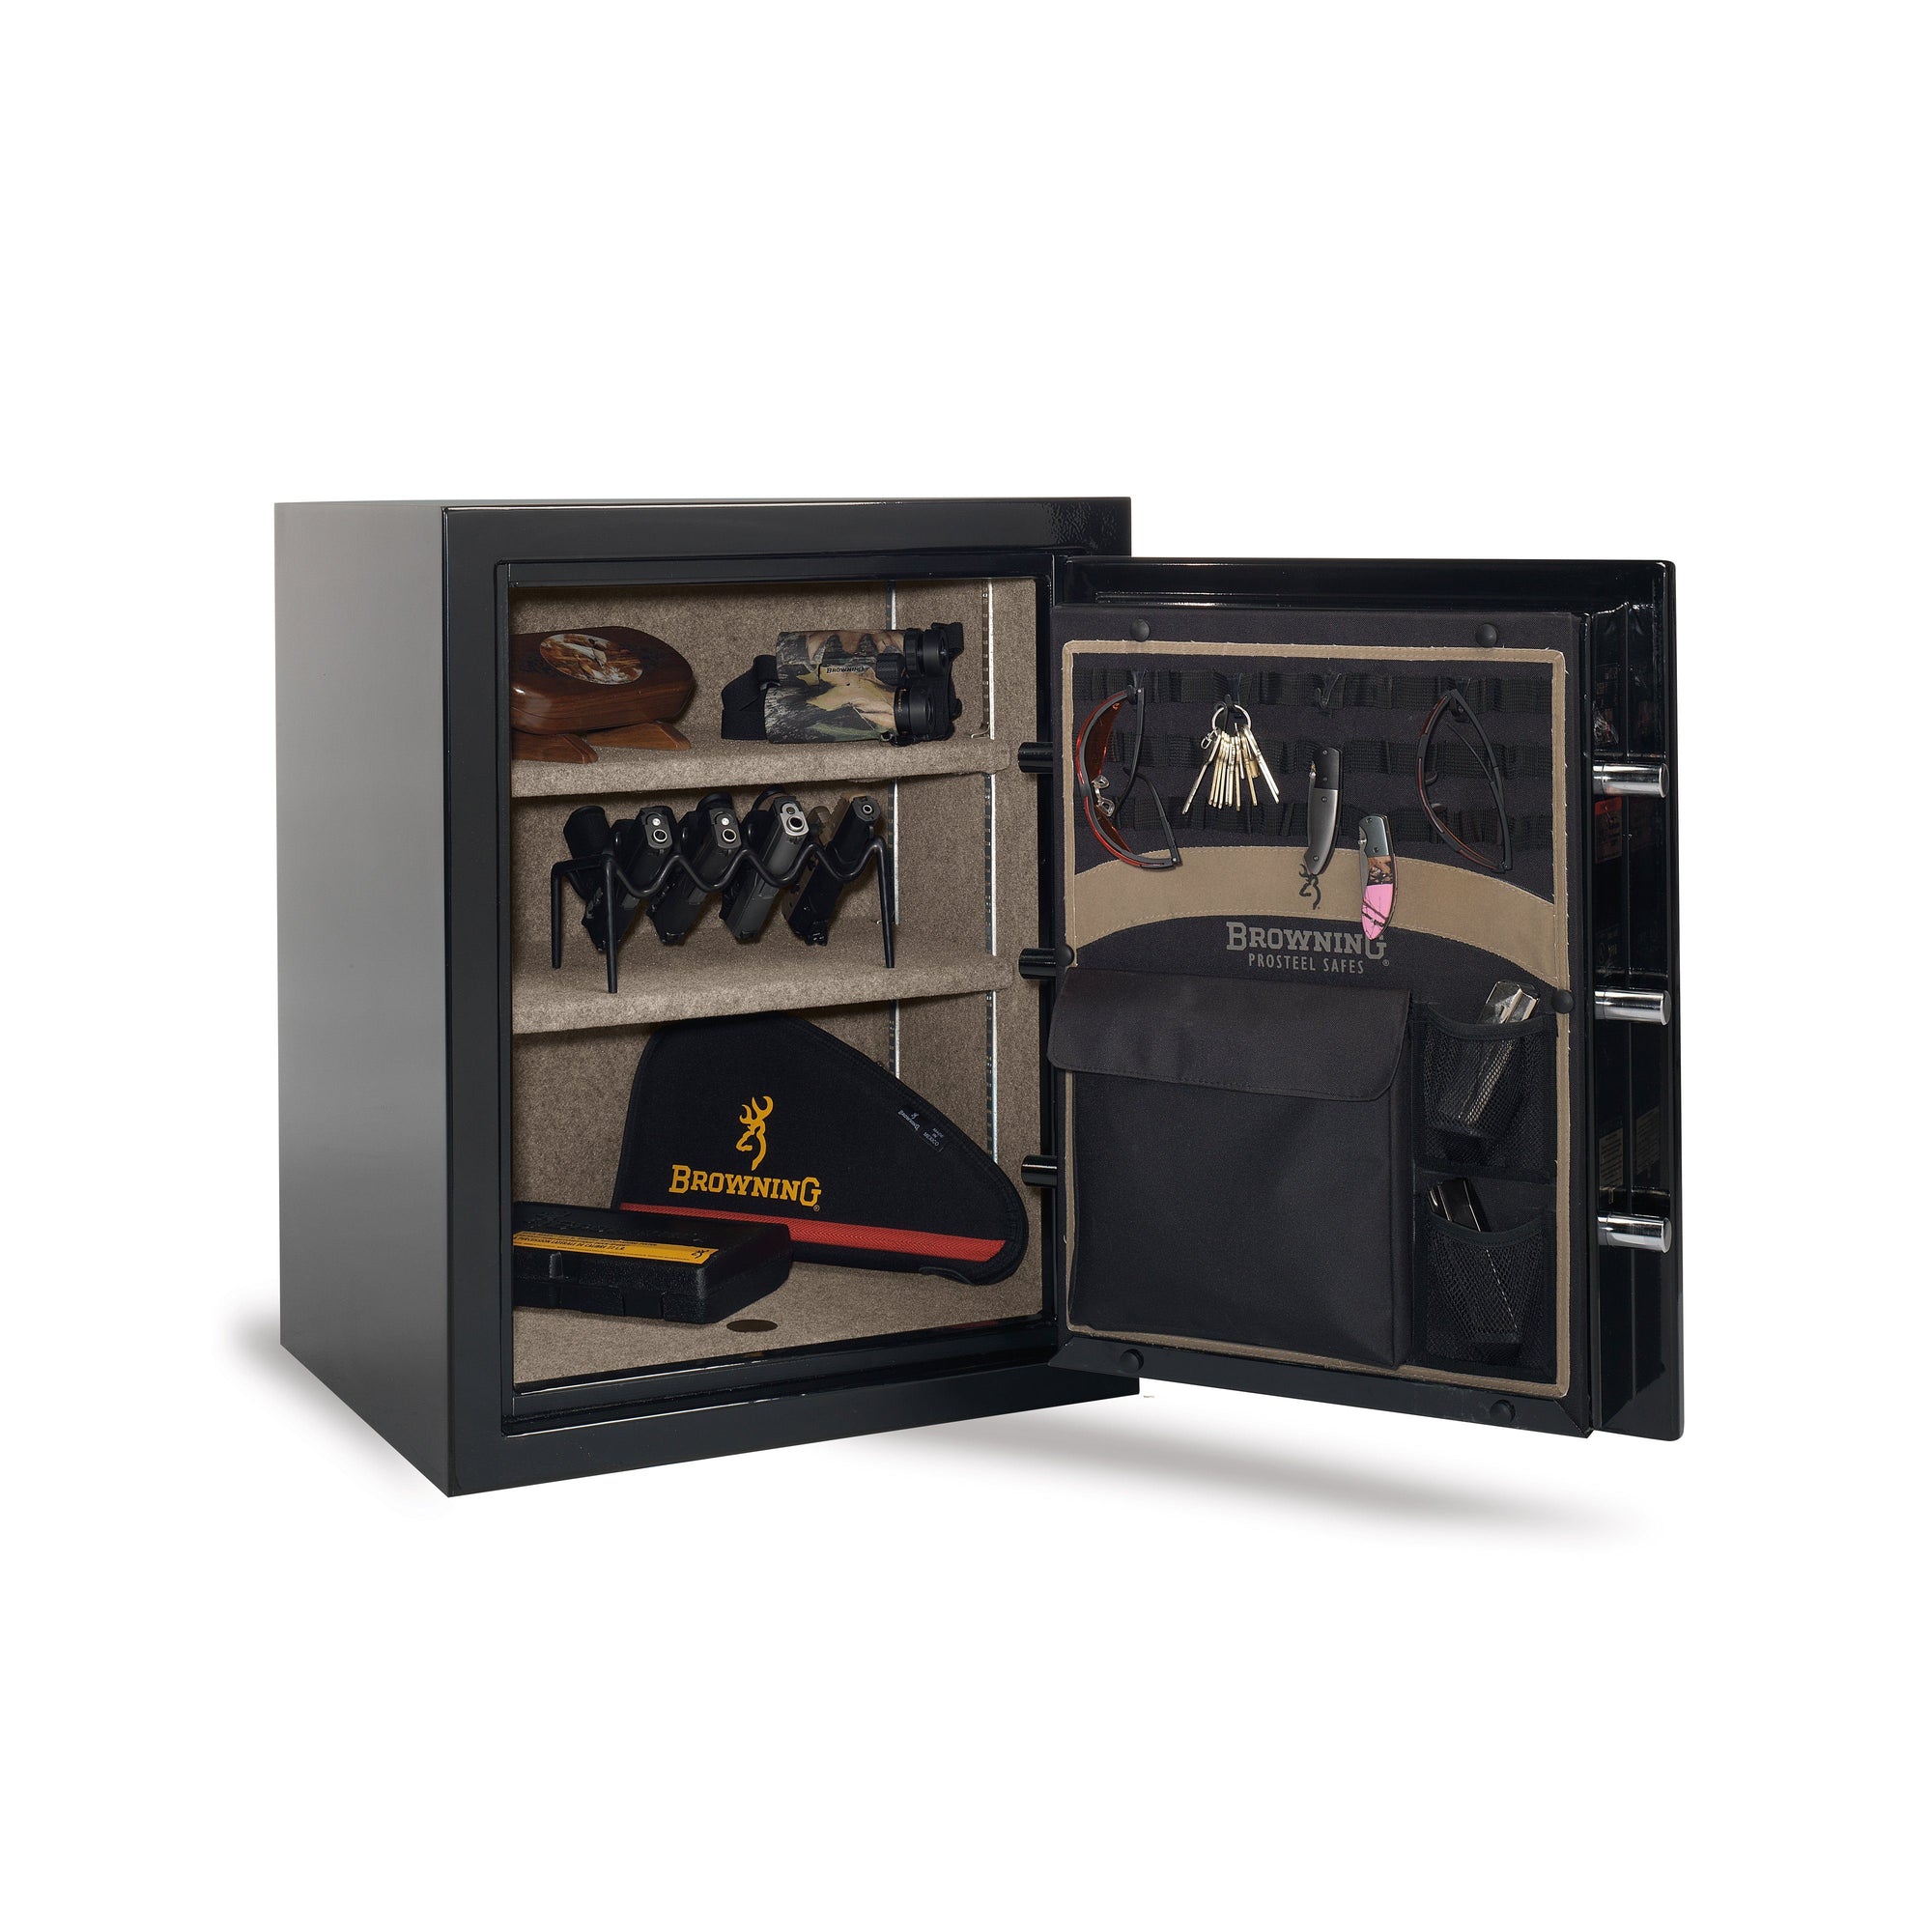 Browning SP9 Core Collection Sporter Compact Safe